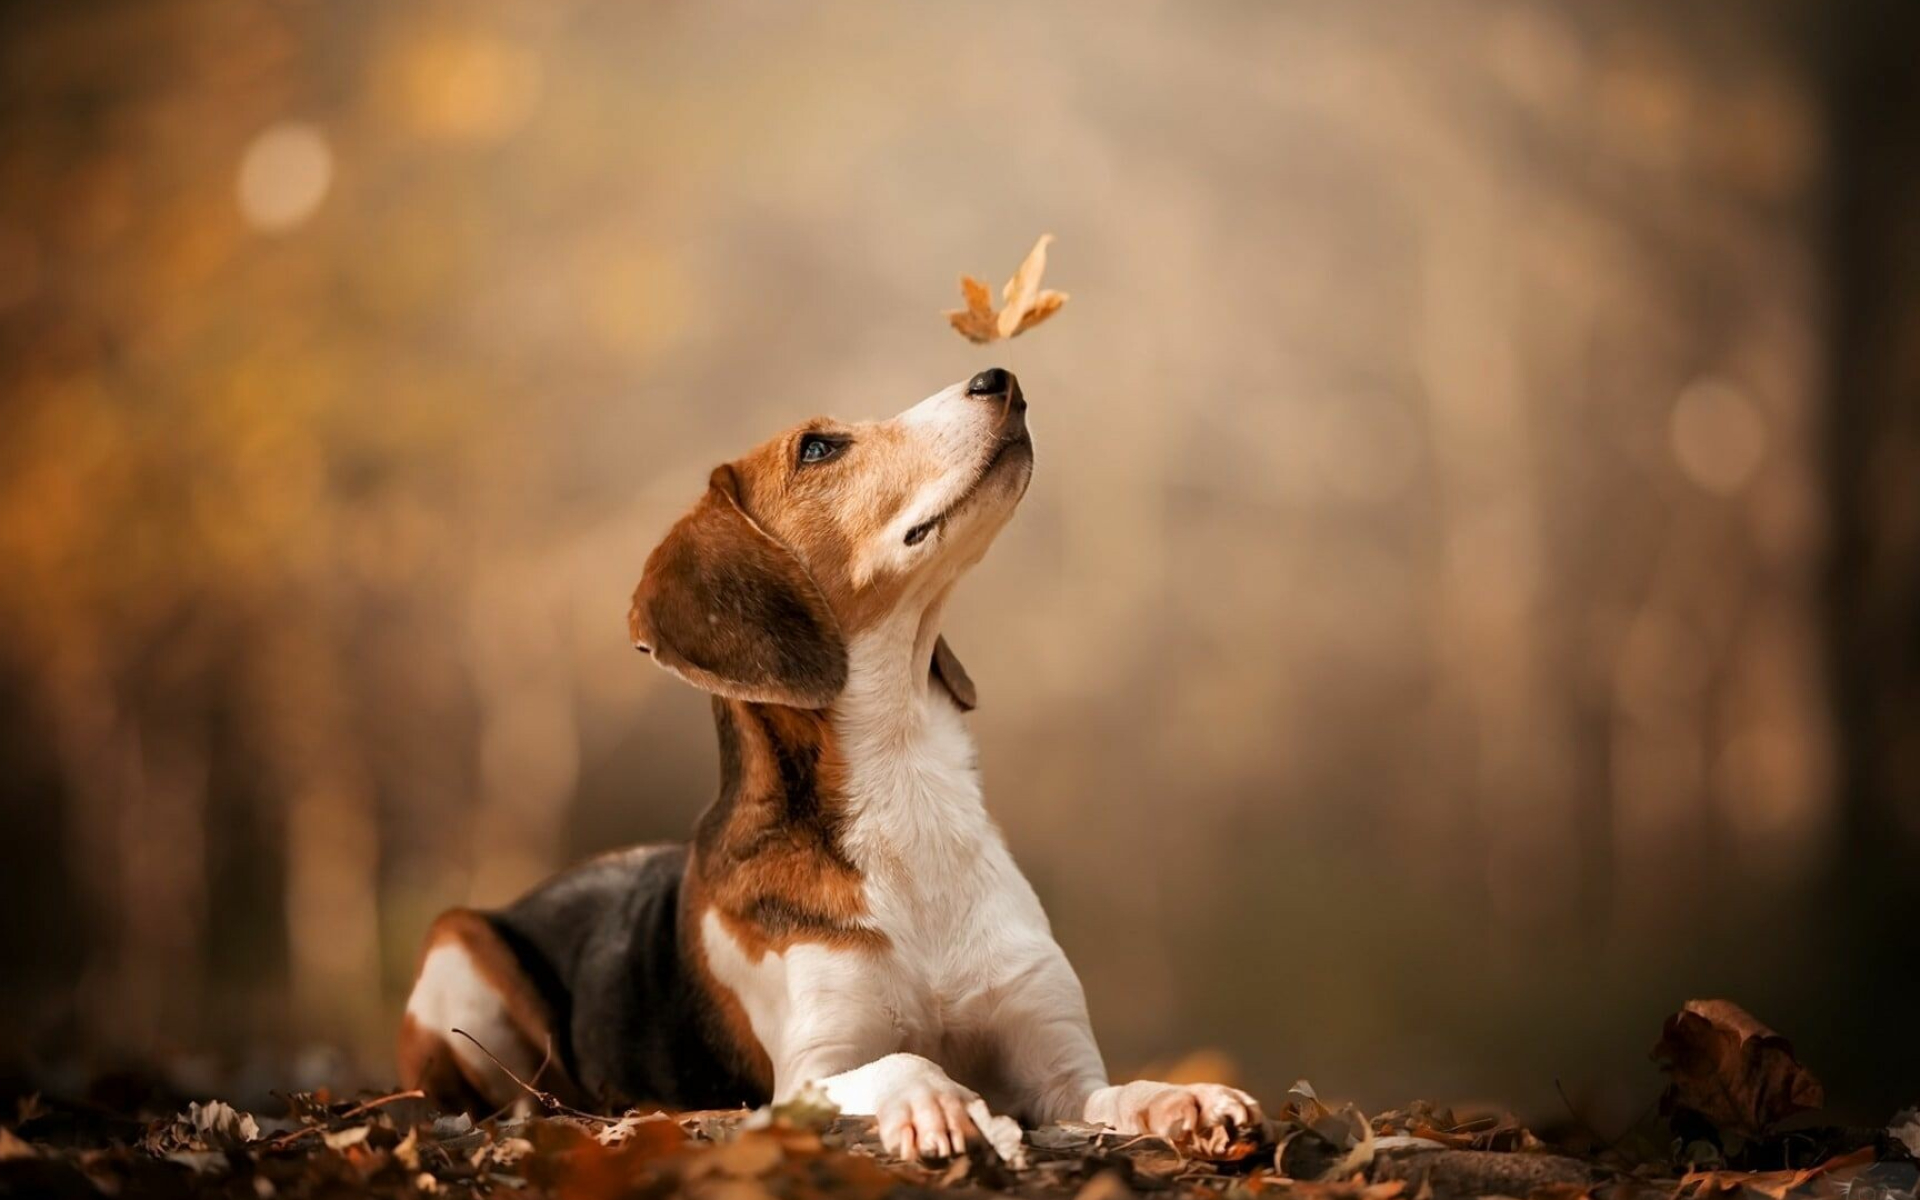 Beagle: These dogs are used to detect food items in luggage being taken into the United States. 1920x1200 HD Wallpaper.